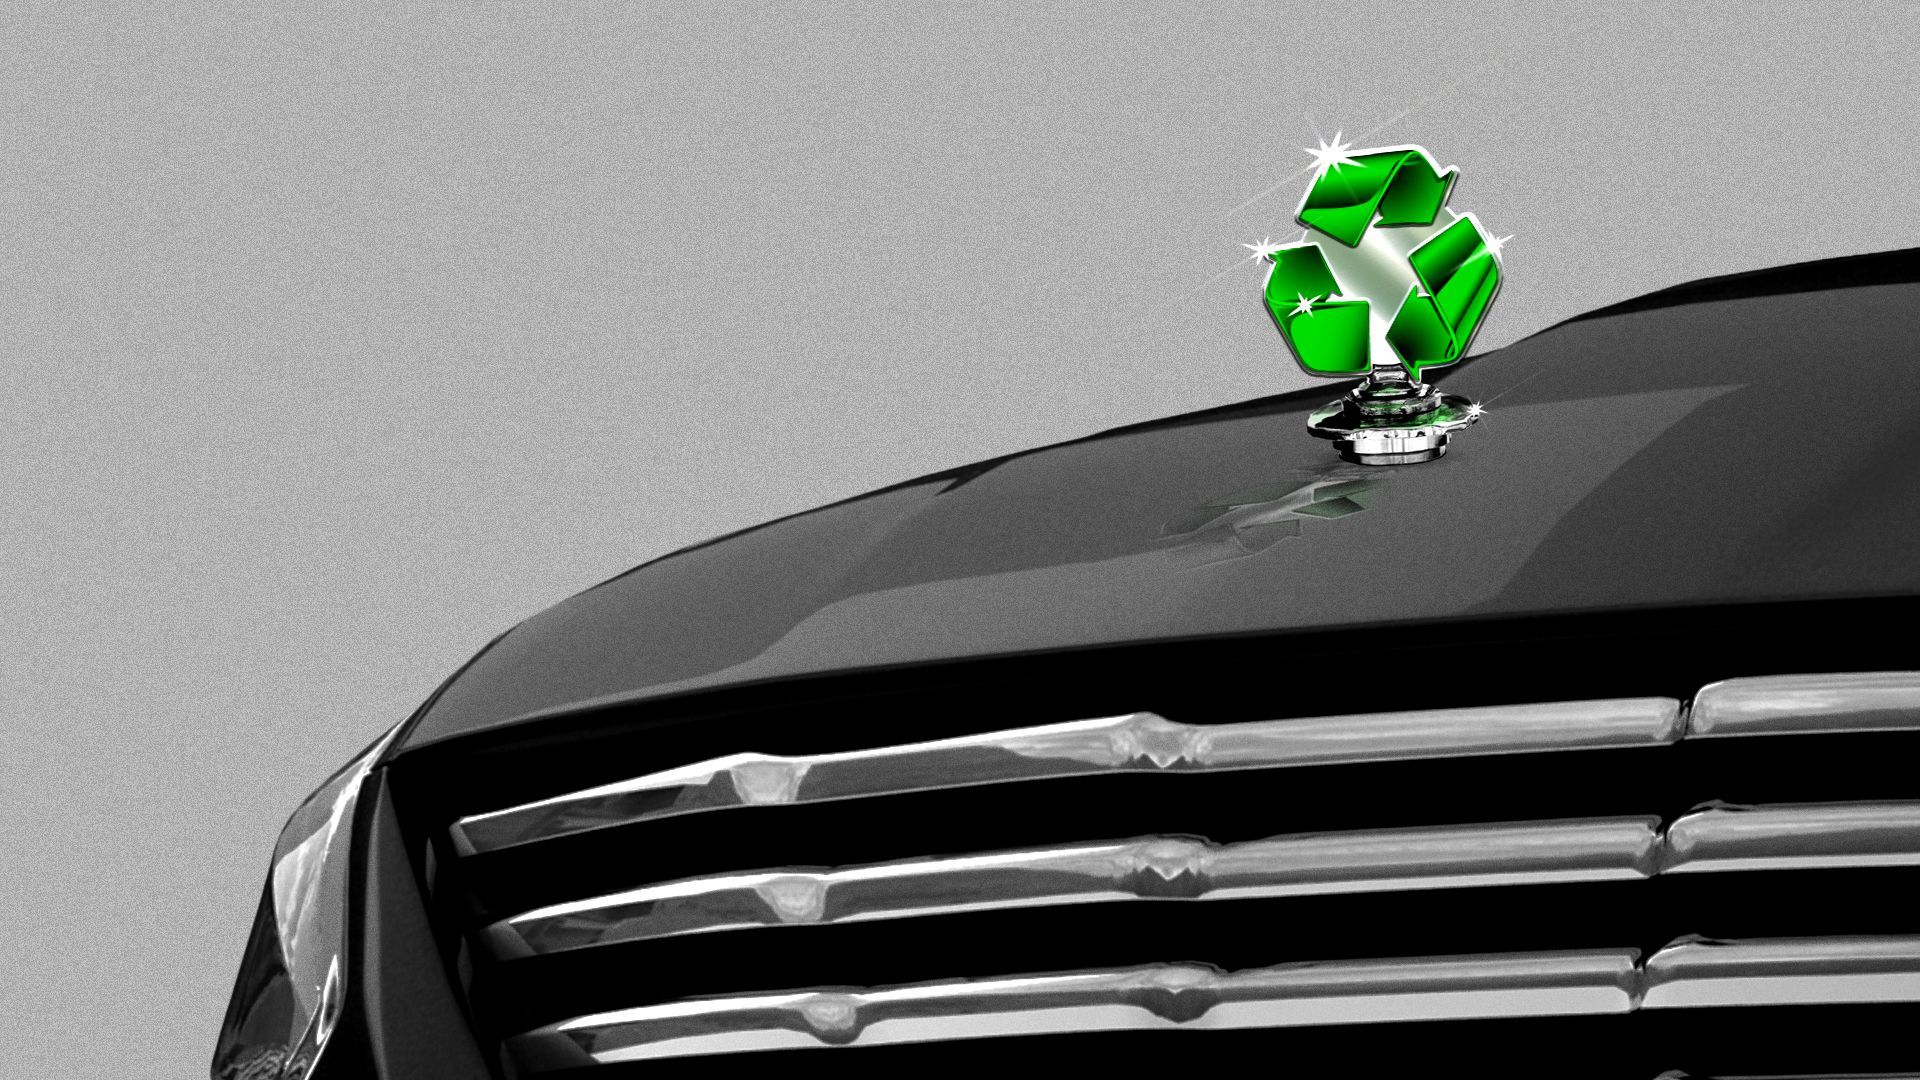 Illustration of a car with a hood ornament shaped like a recycling symbol.